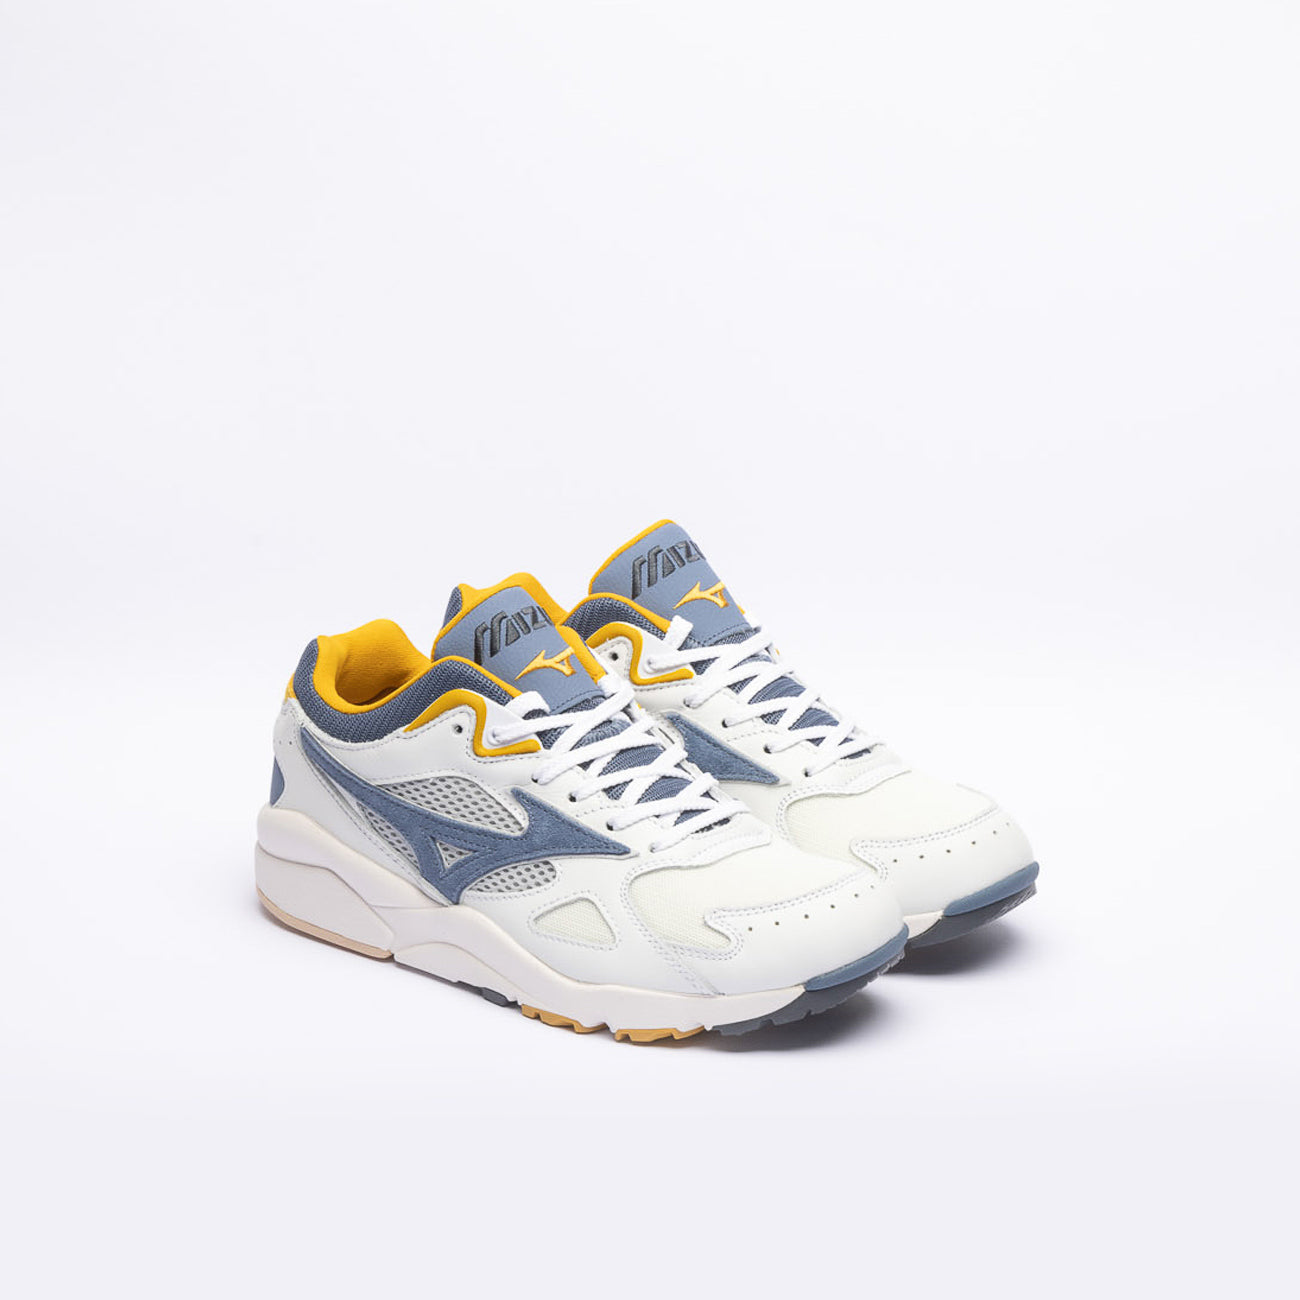 Mizuno Sky Medal running sneakers in white leather and fabric with blue details